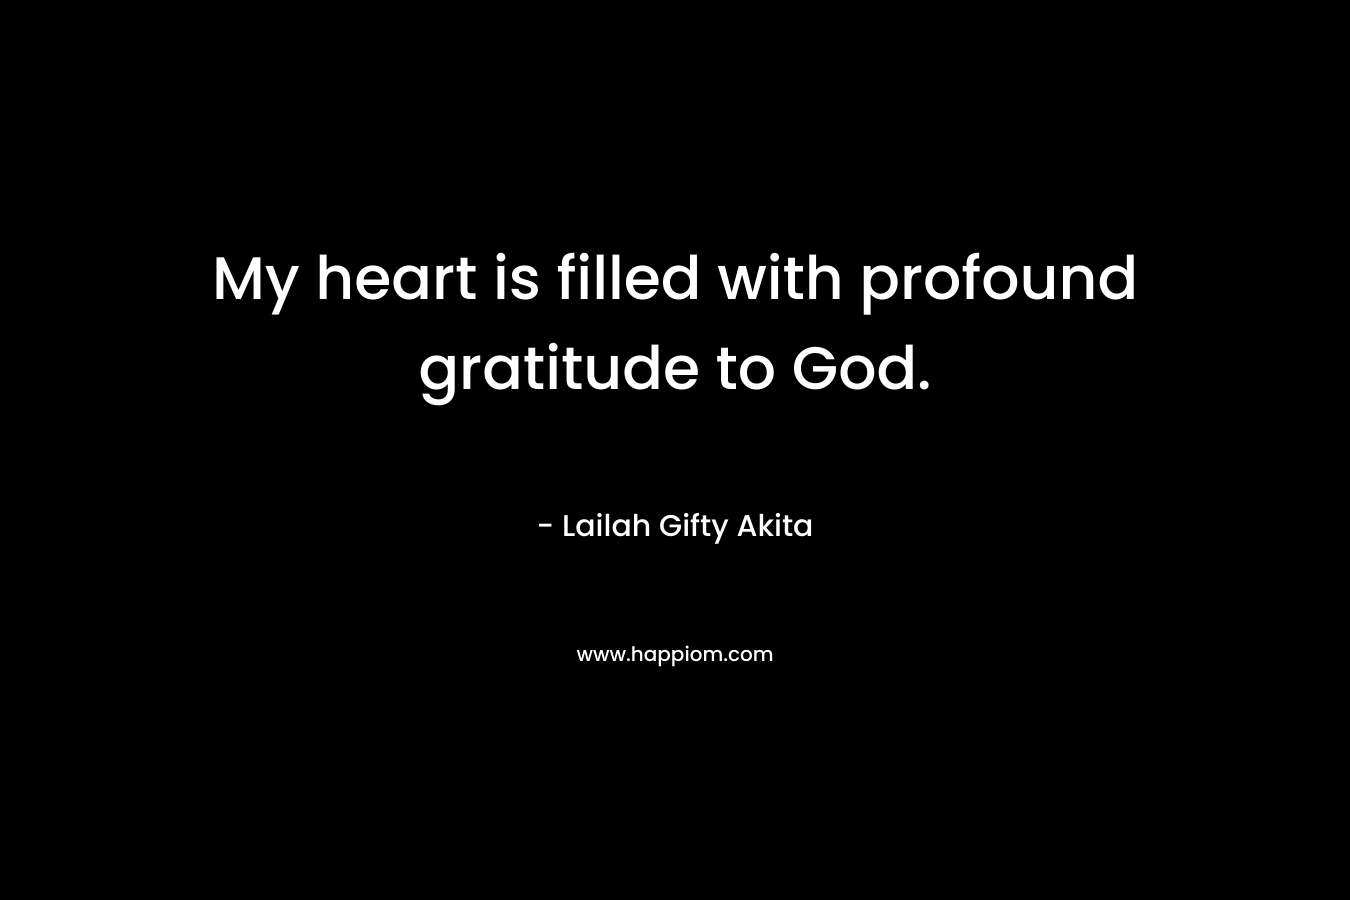 My heart is filled with profound gratitude to God.